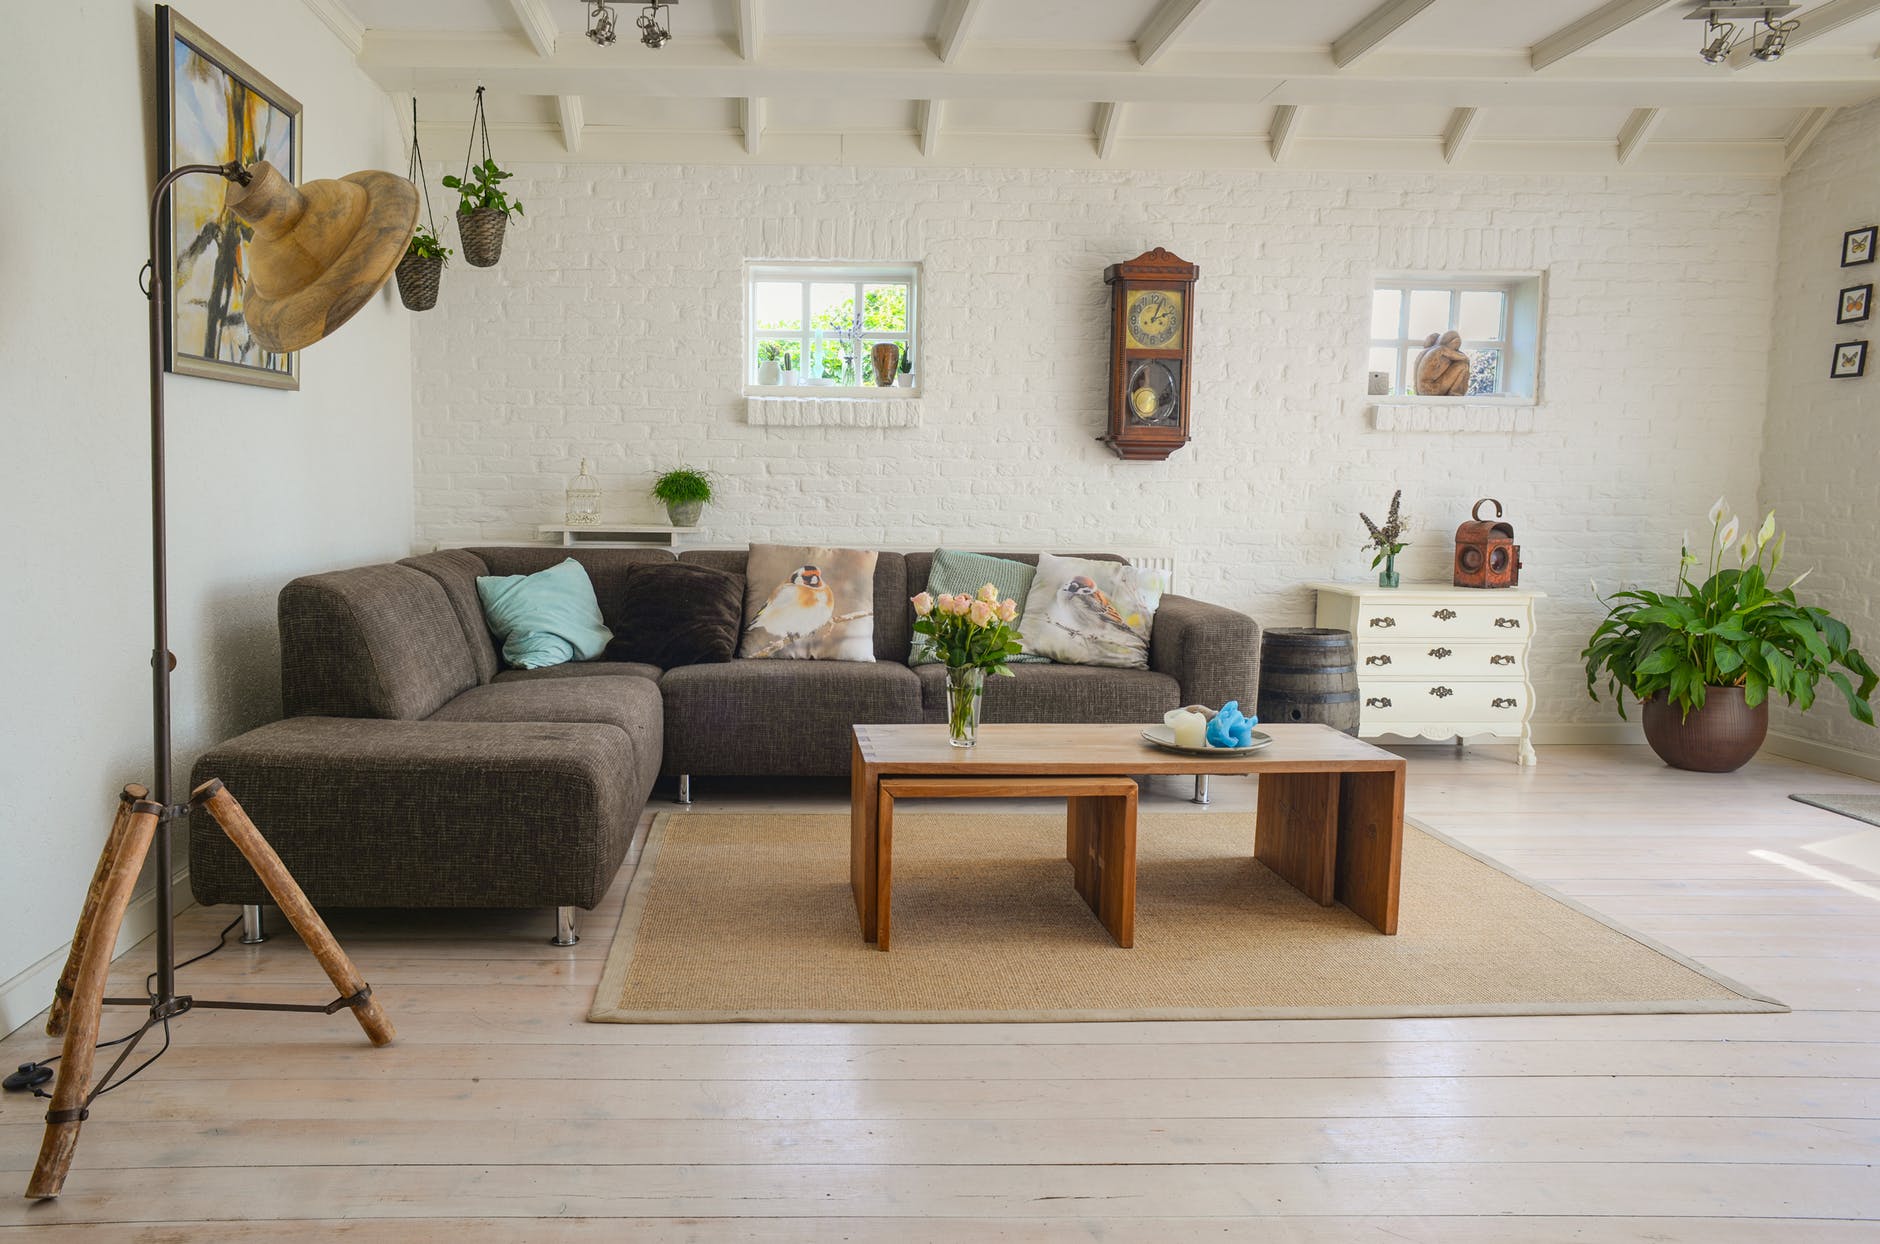 How to Transform Your Home into a Personal Sanctuary